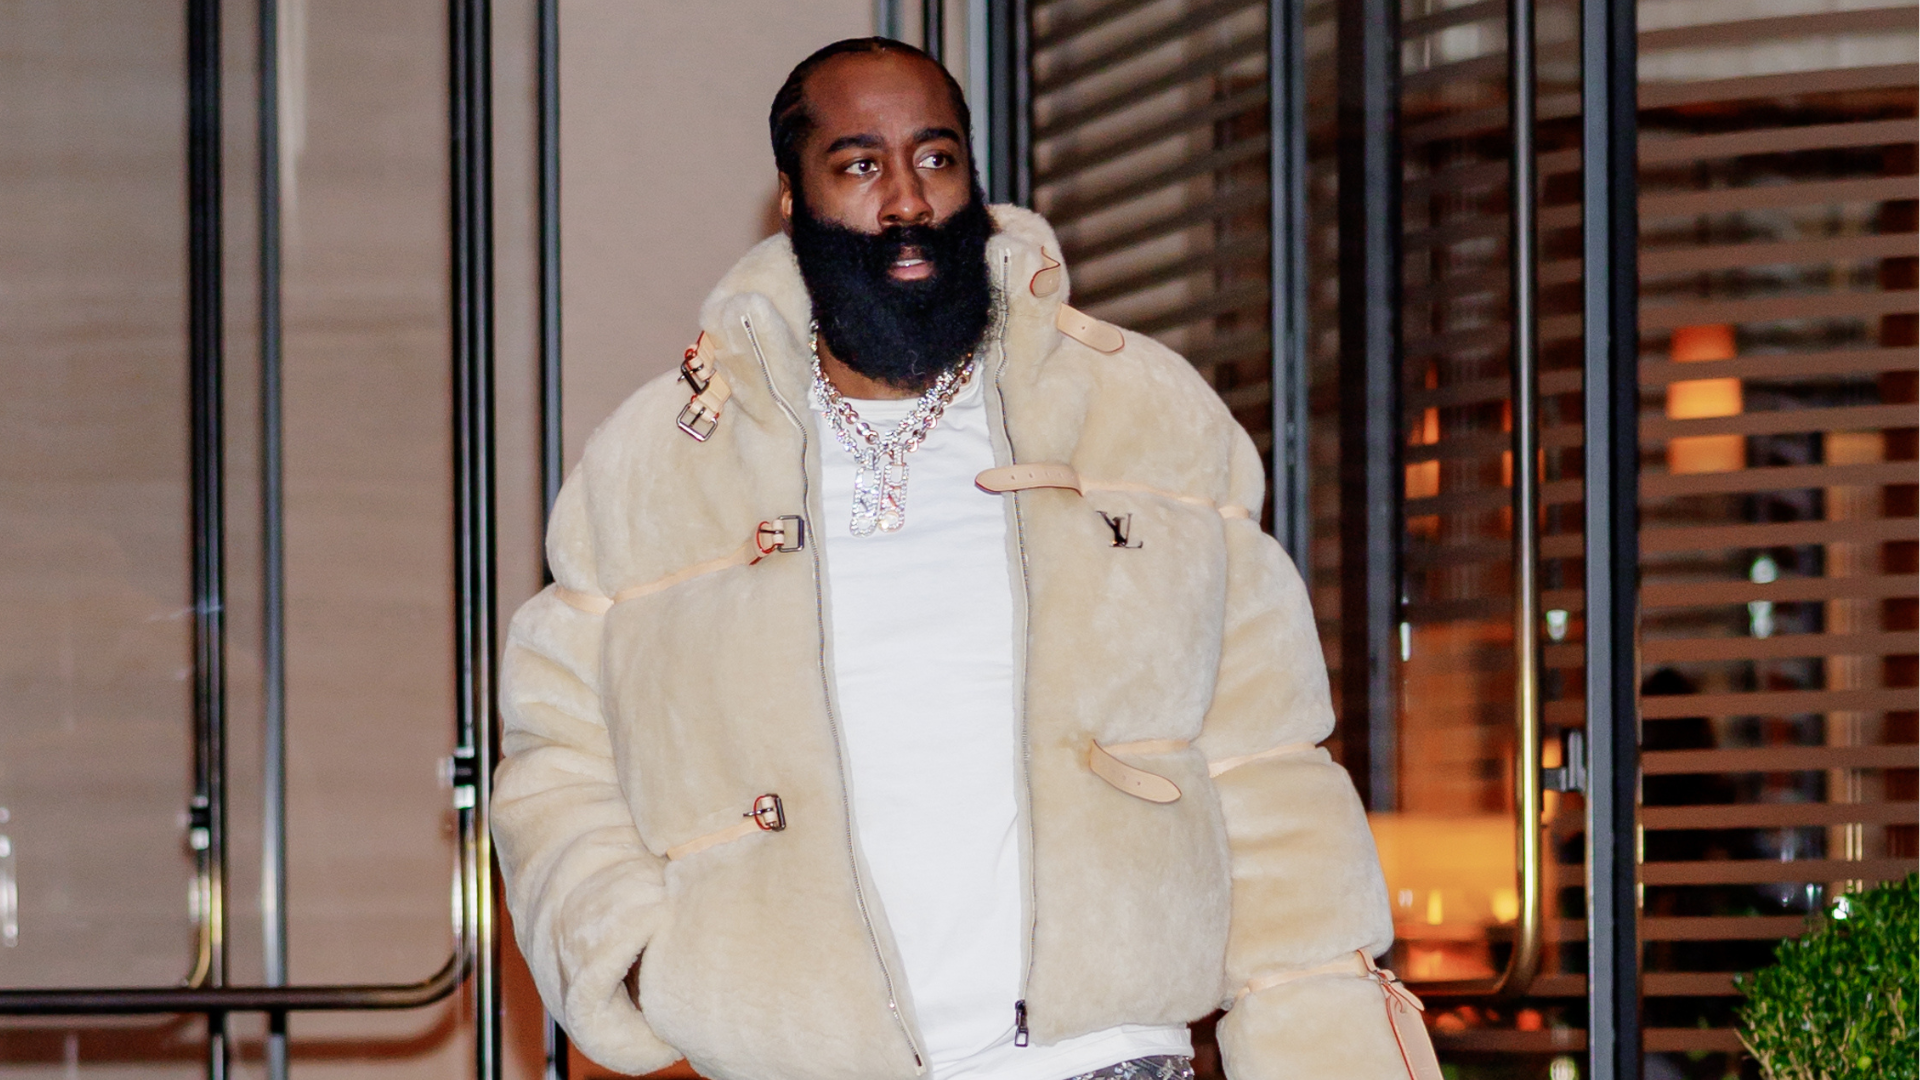 In Case You Missed It: James Harden Makes A Statement In Louis Vuitton, Rihanna Debuts Blonde Hair, And More